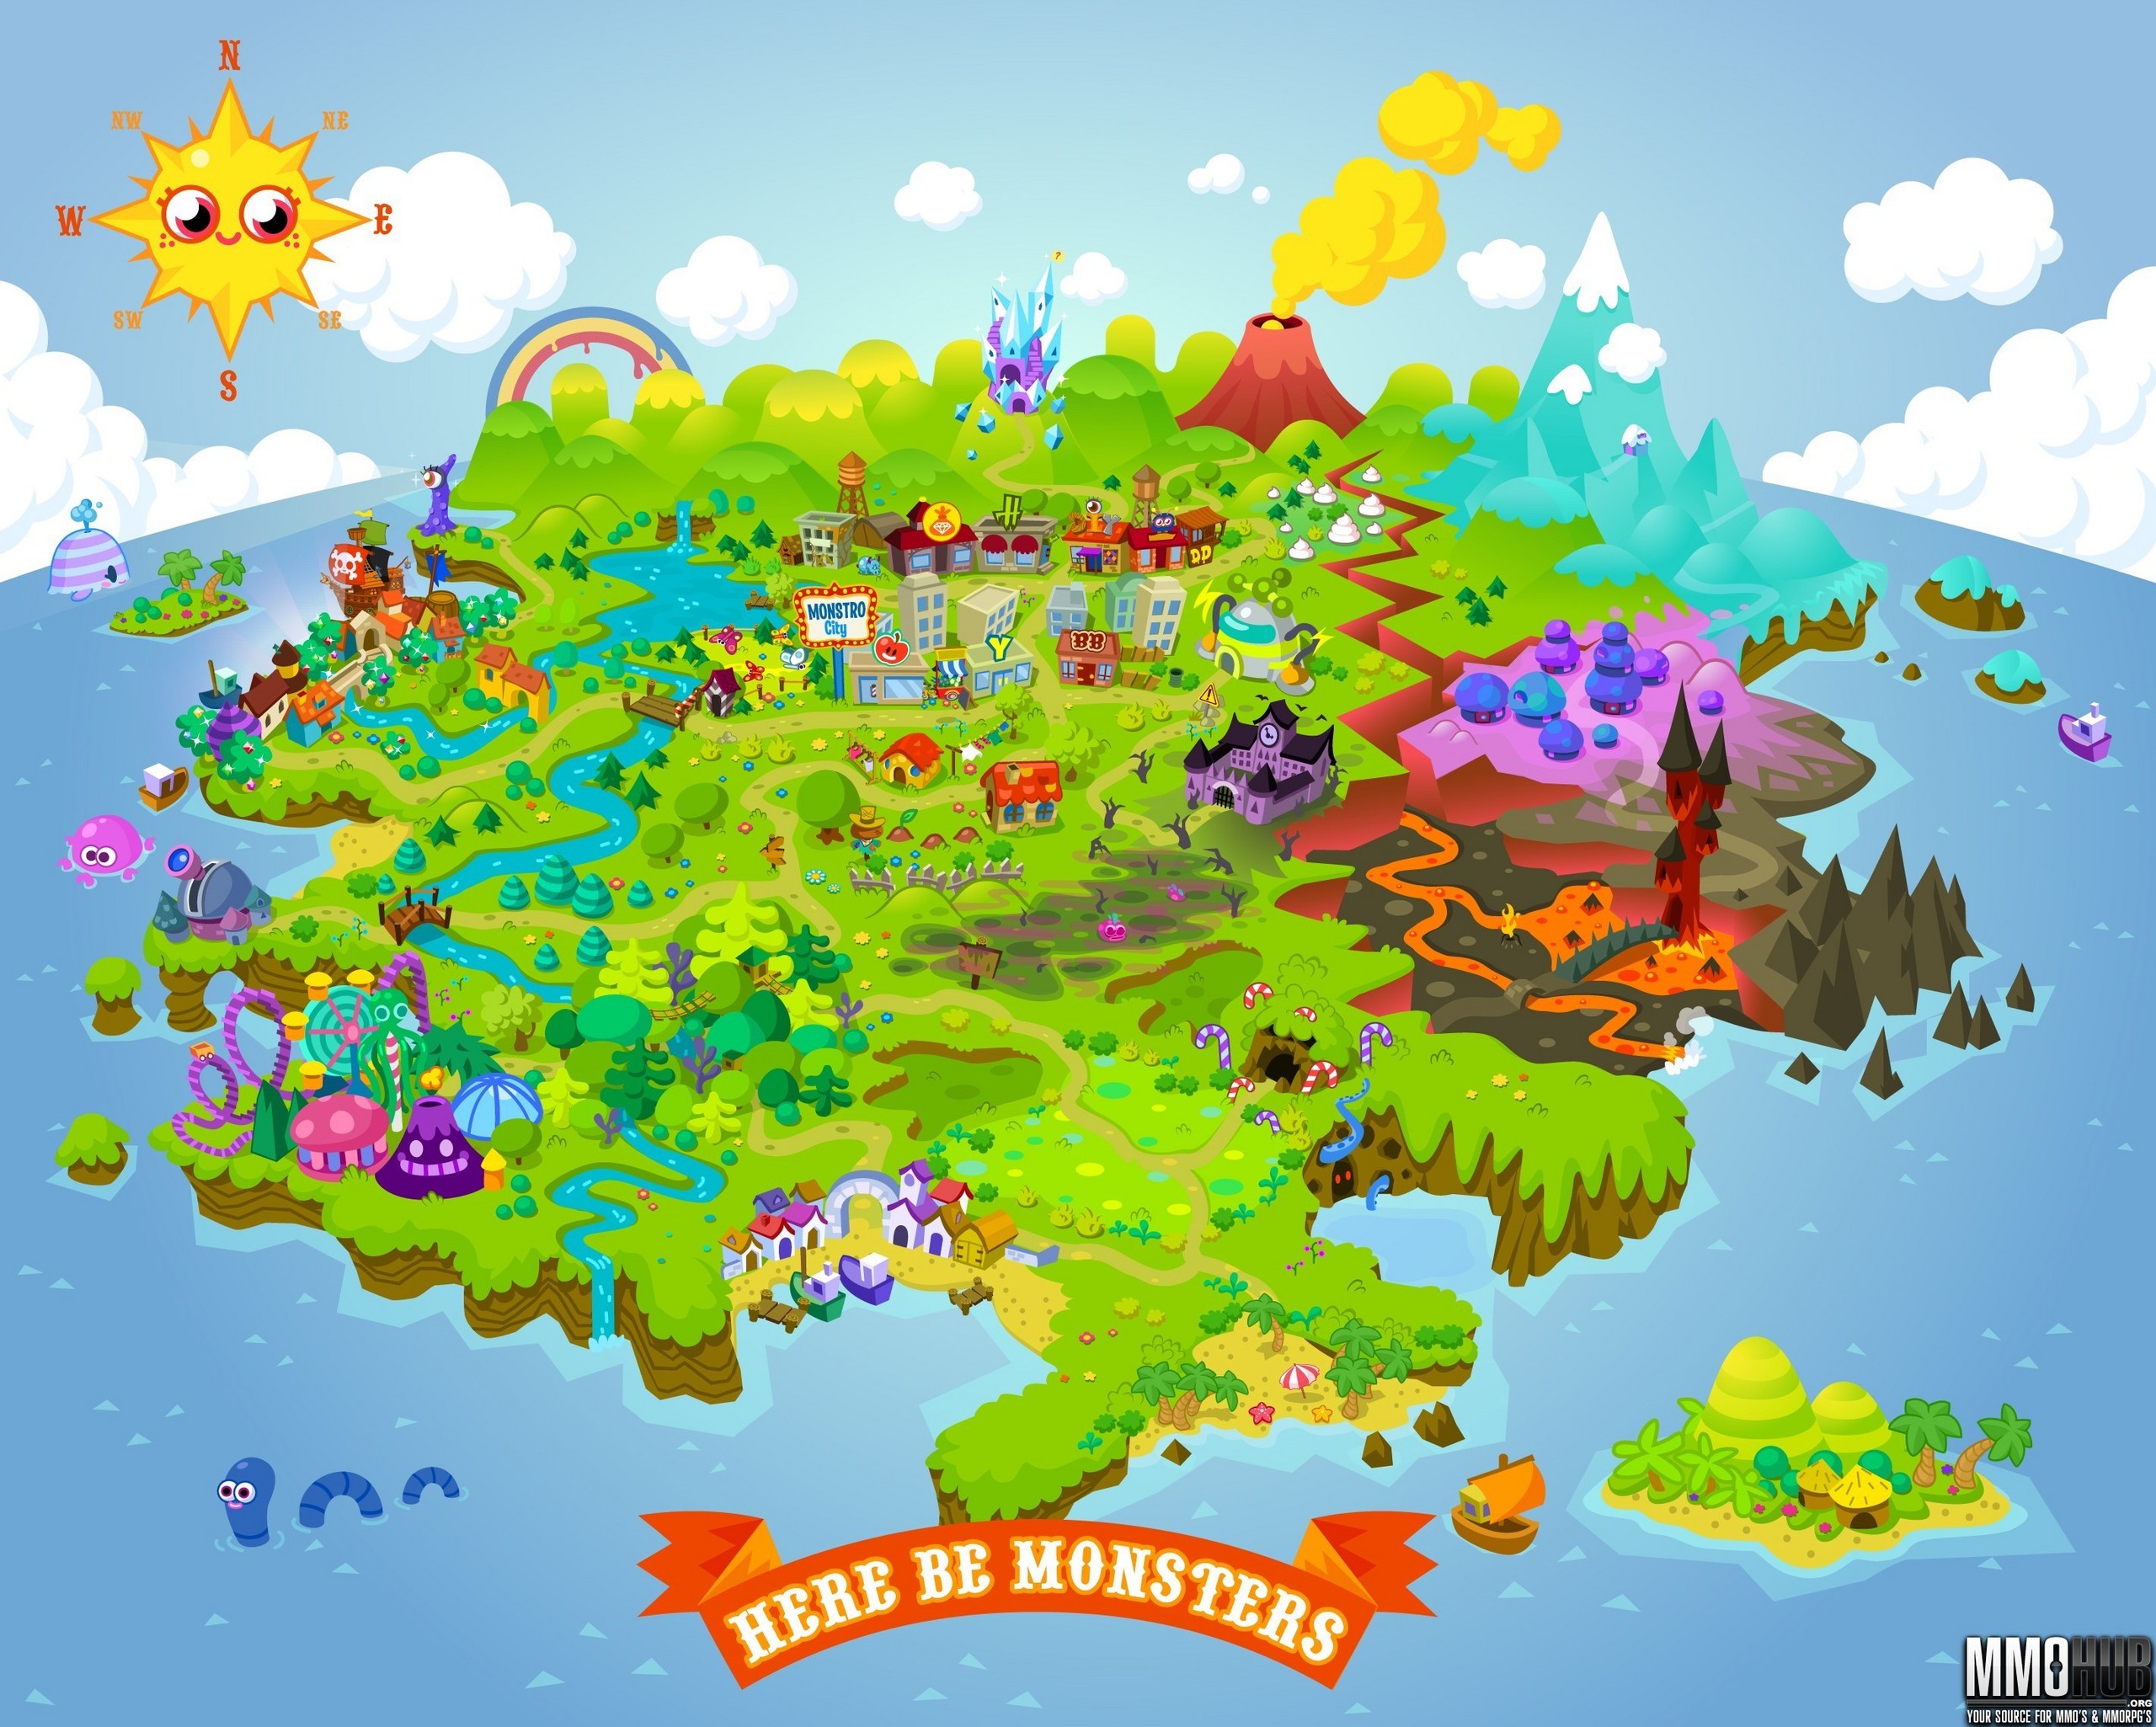 Moshi Monsters Codes 1000s of FREE Moshi Codes